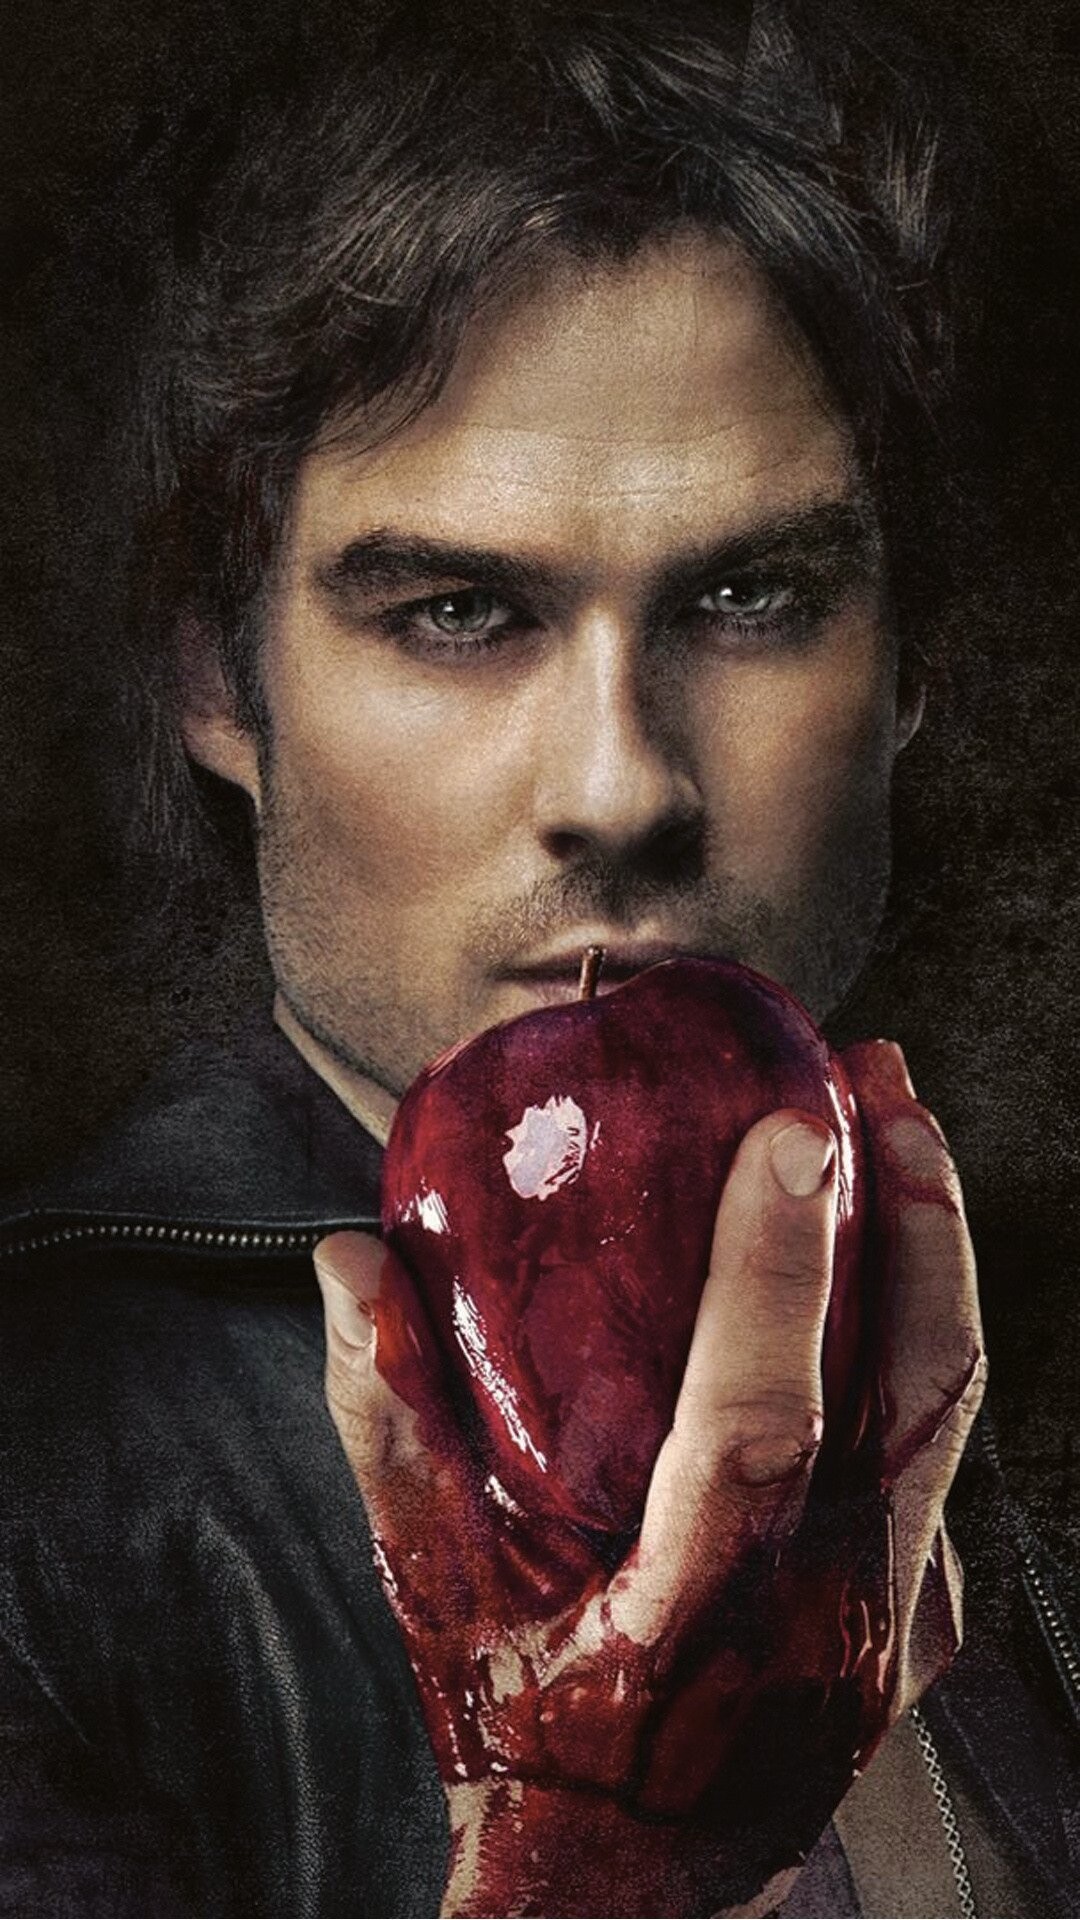 The Vampire Diaries (TV Series): American TV Show, Ian Somerhalder, Fruit Covered With Blood Methafor, Damon. 1080x1920 Full HD Background.